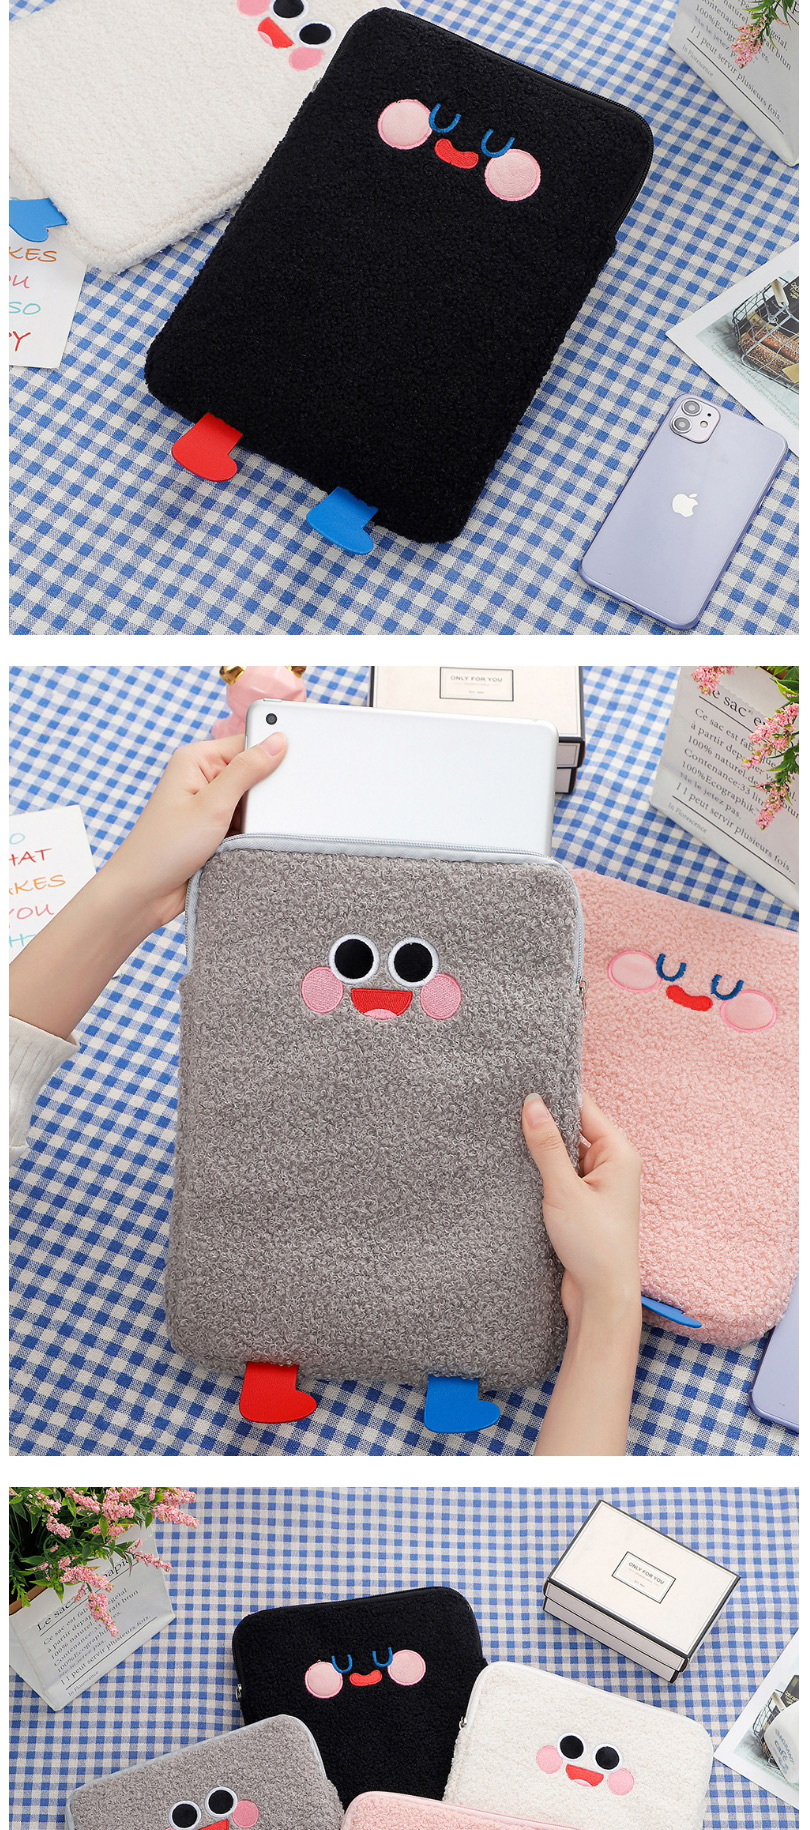 Fashion Pink Plush Big Eyes Embroidered Tablet Bag 11 Inch 10.5 Inch 9.7 Inch Inner Liner,Computer supplies